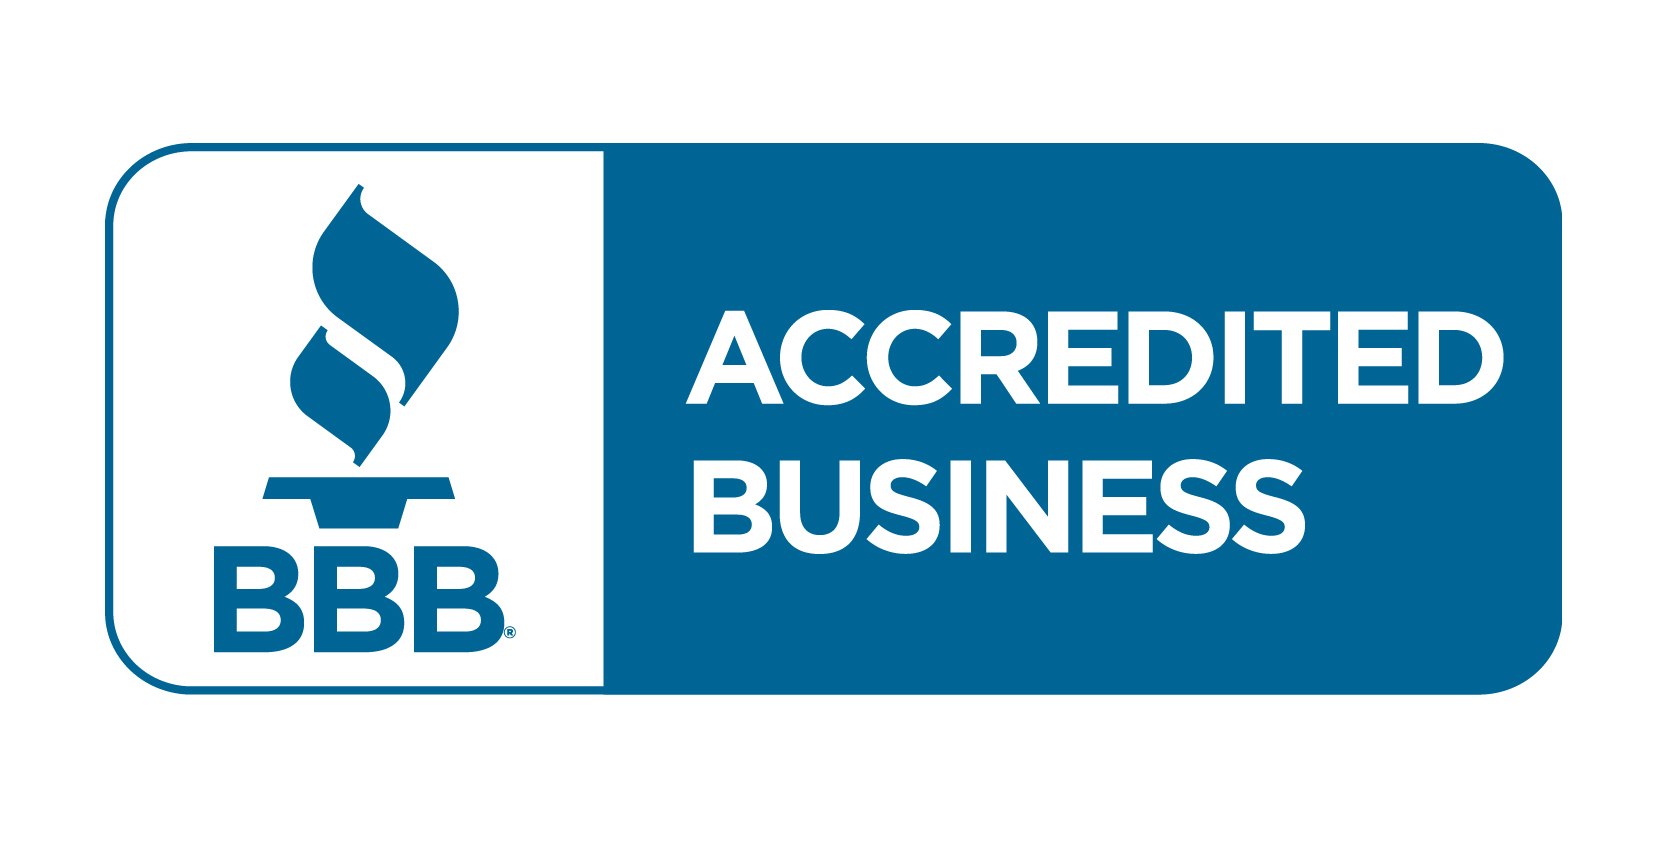 BBB Accredited Business | Tom's Carpet & Flooring Outlet